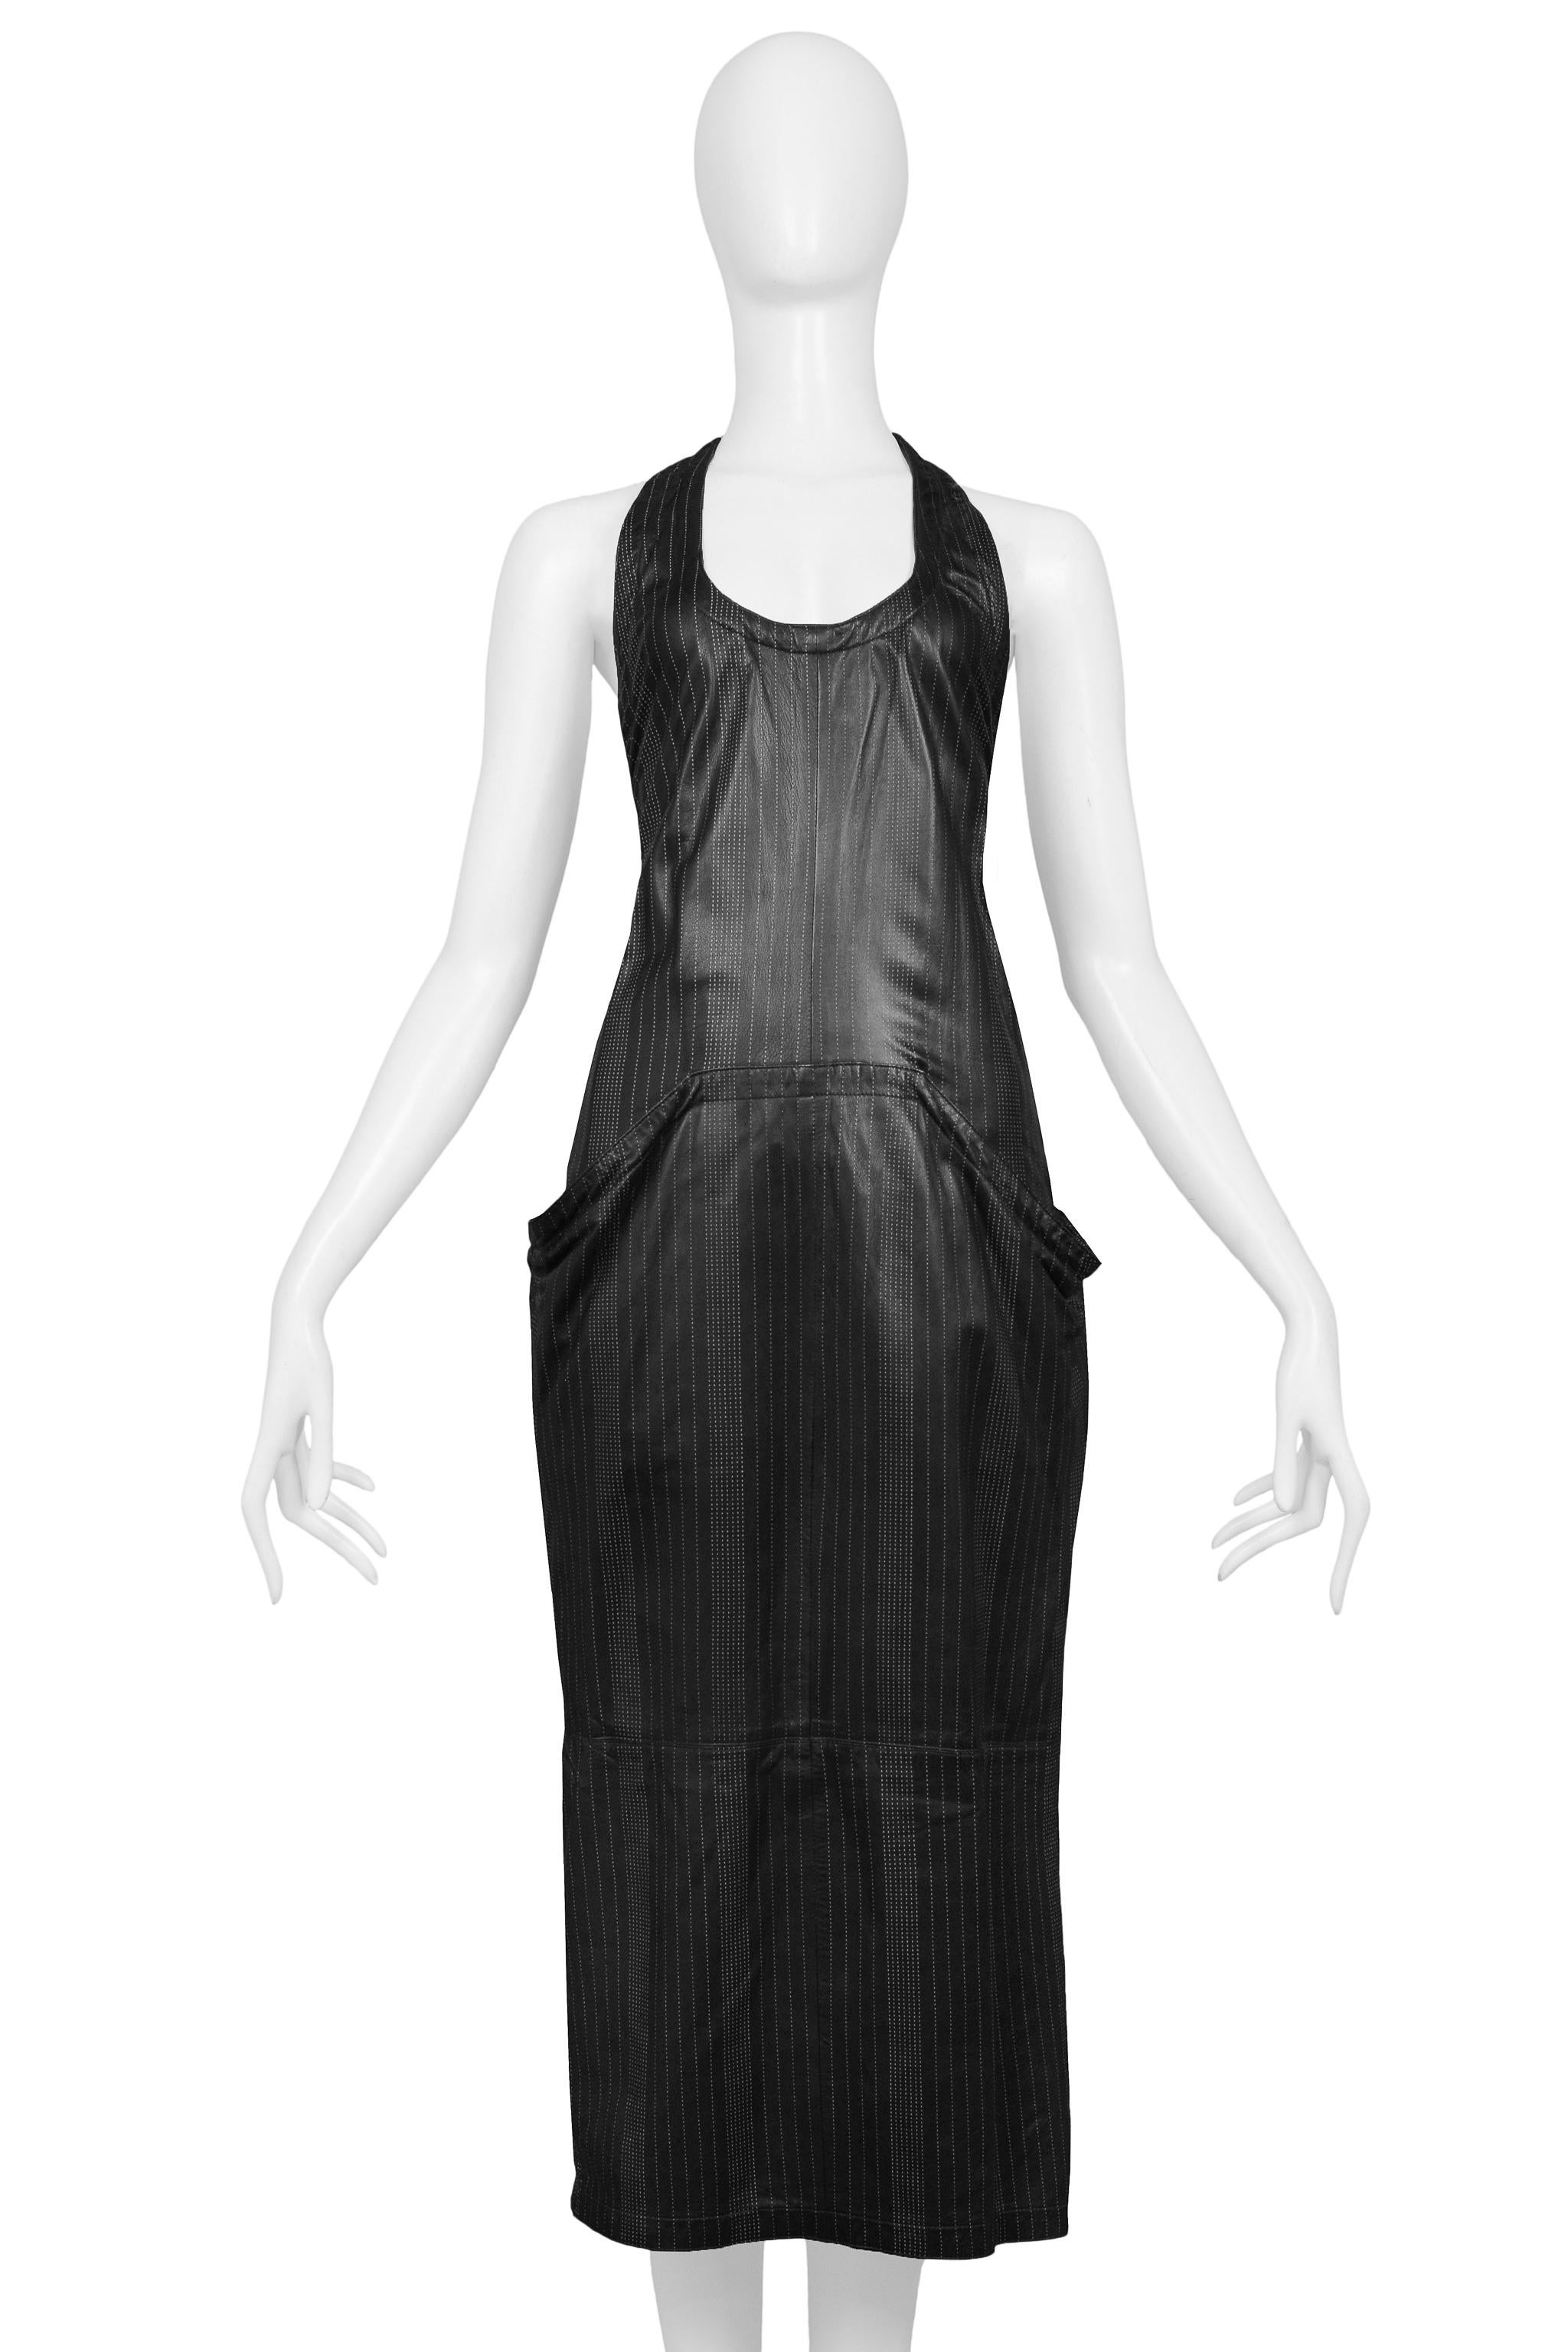 Versace Black Leather Pinstripe Tank Dress 1990S In Excellent Condition For Sale In Los Angeles, CA